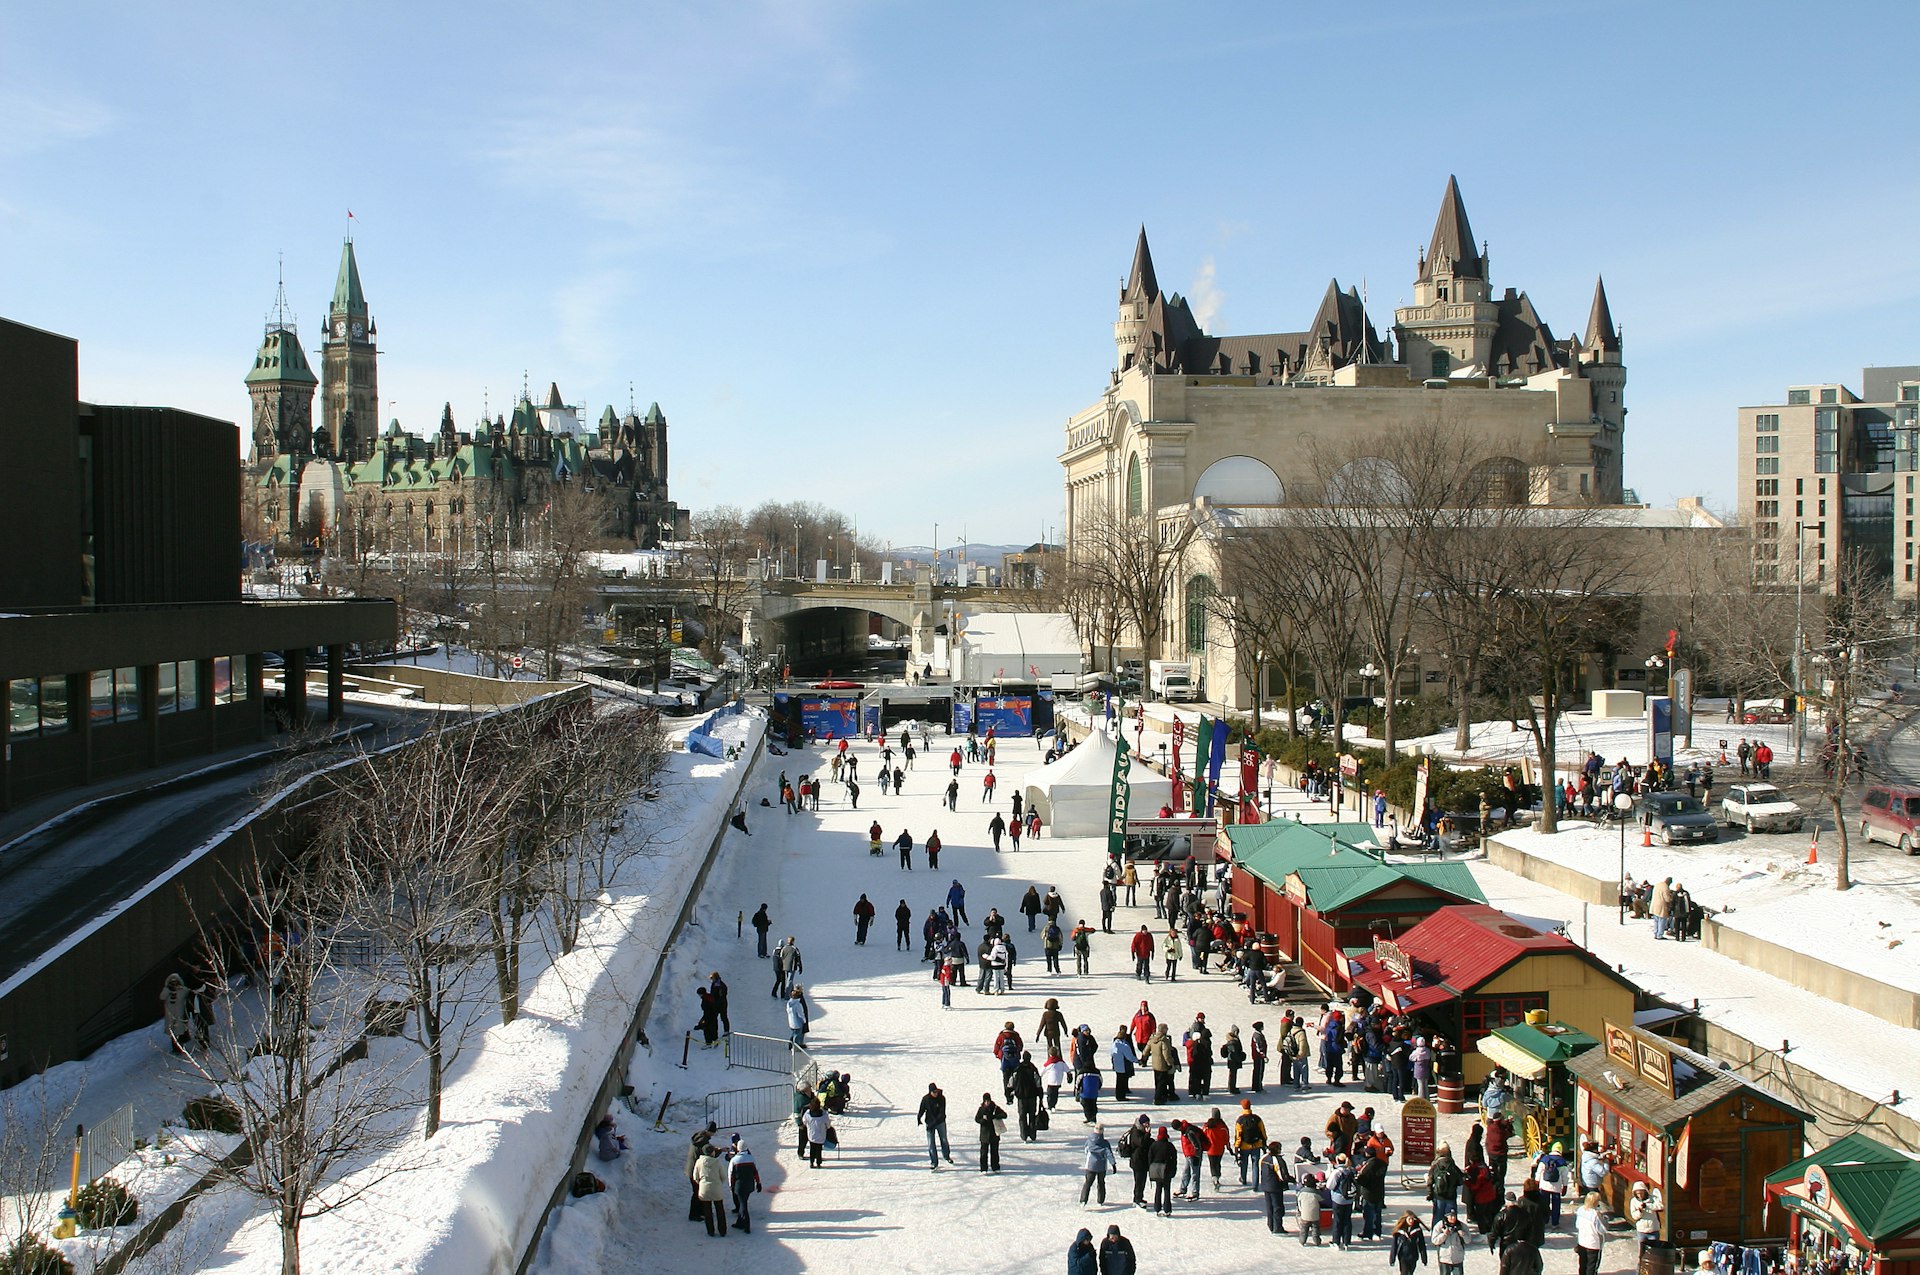 Ottawa's Rideau Canal, the world's largest ice skating rink